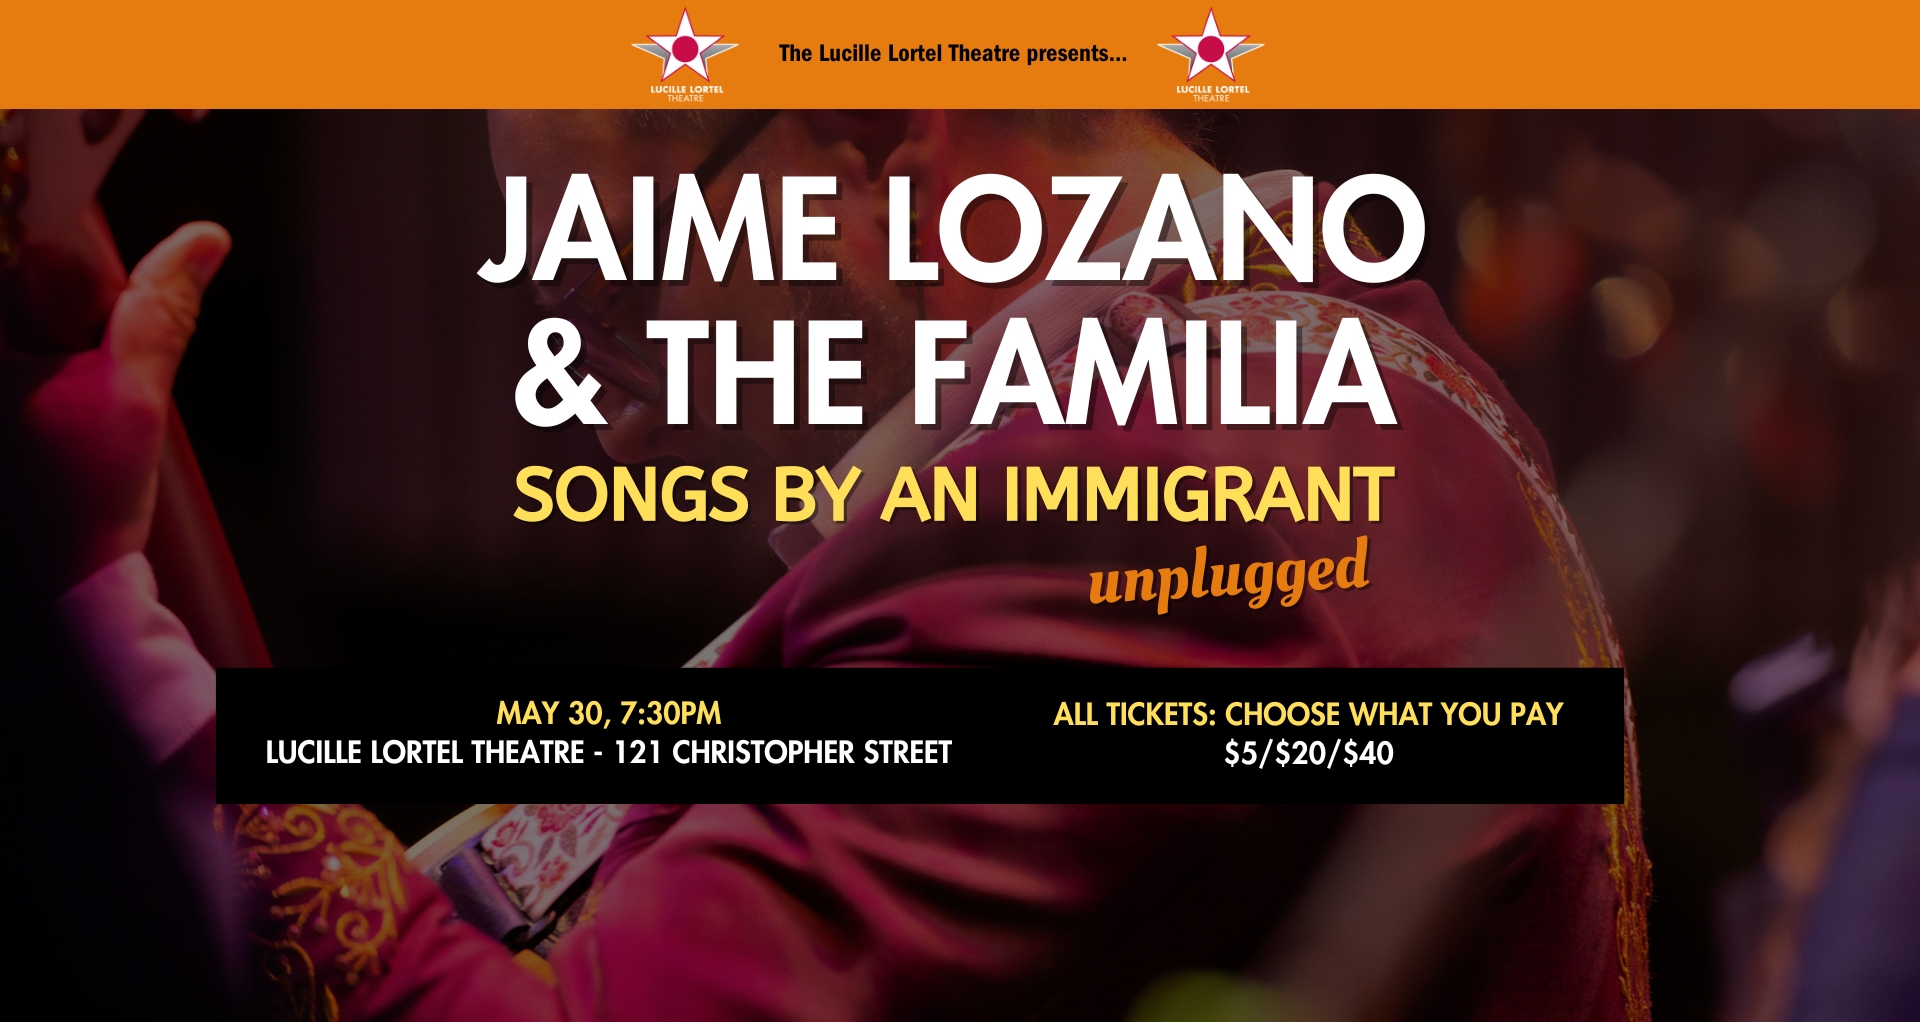 Jaime Lozano and the Familia: Songs by an Immigrant (unplugged) playing on May 30th, 7:30PM, at the Lucille Lortel Theatre. All tickets are pay what you wish.